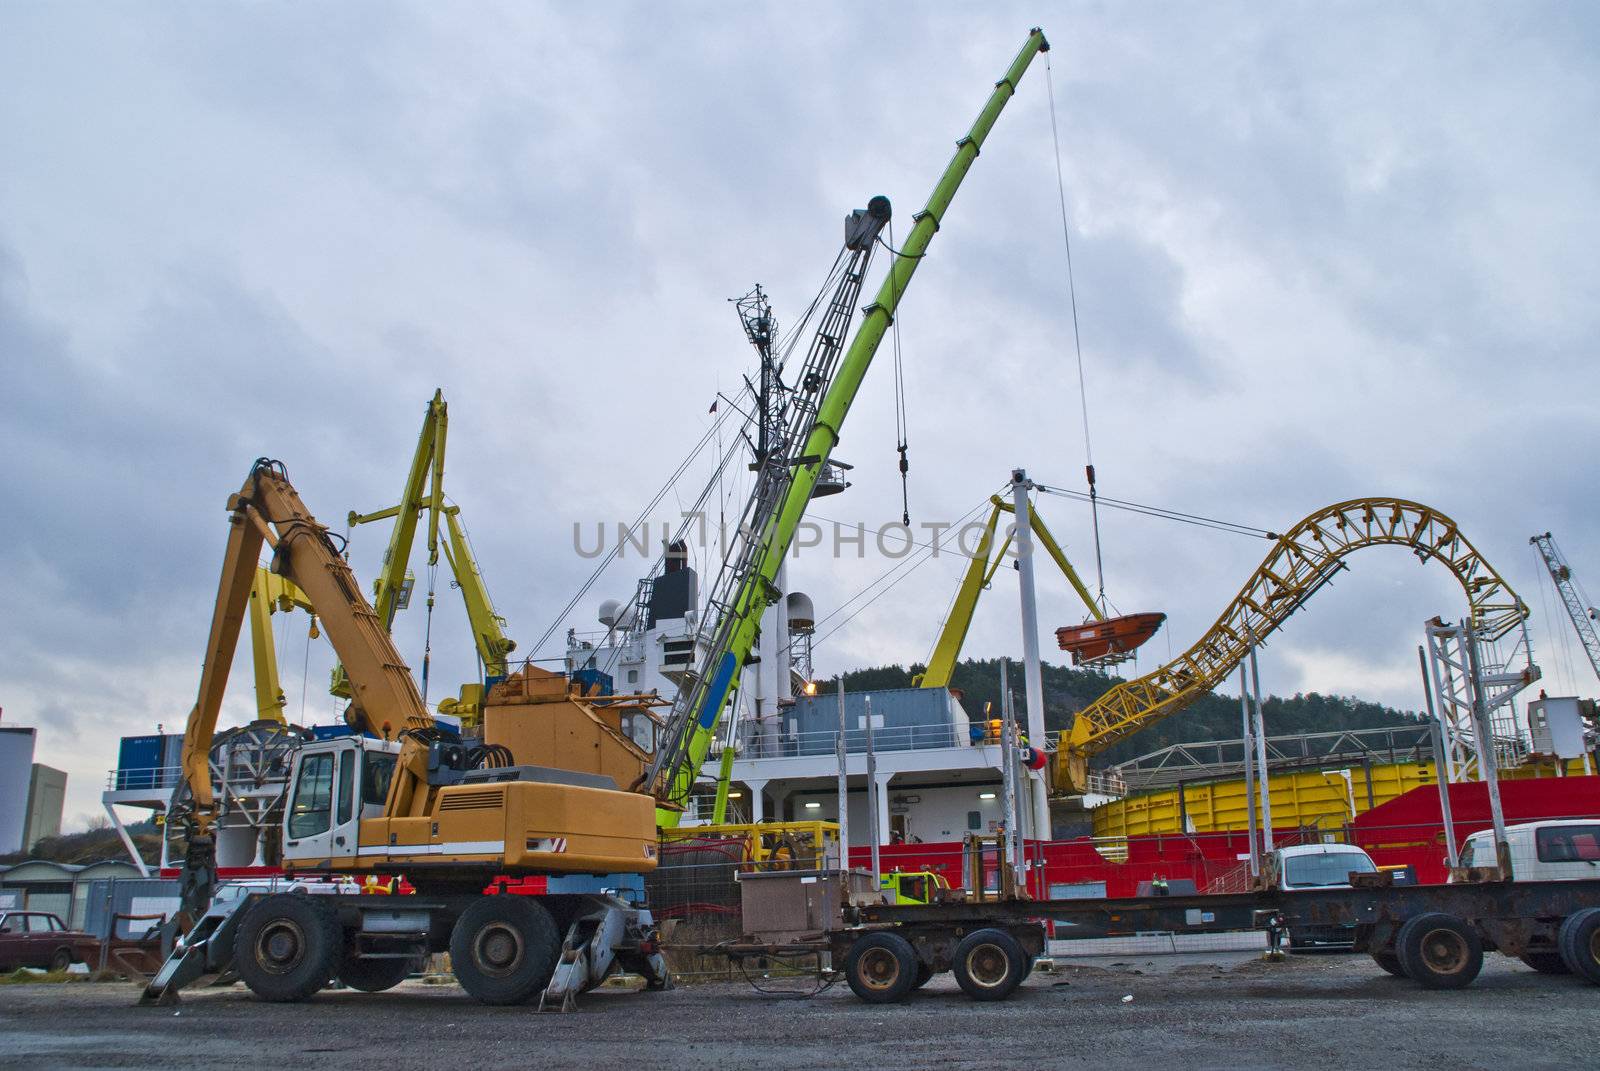 Cranes in action on the halden harbor by steirus